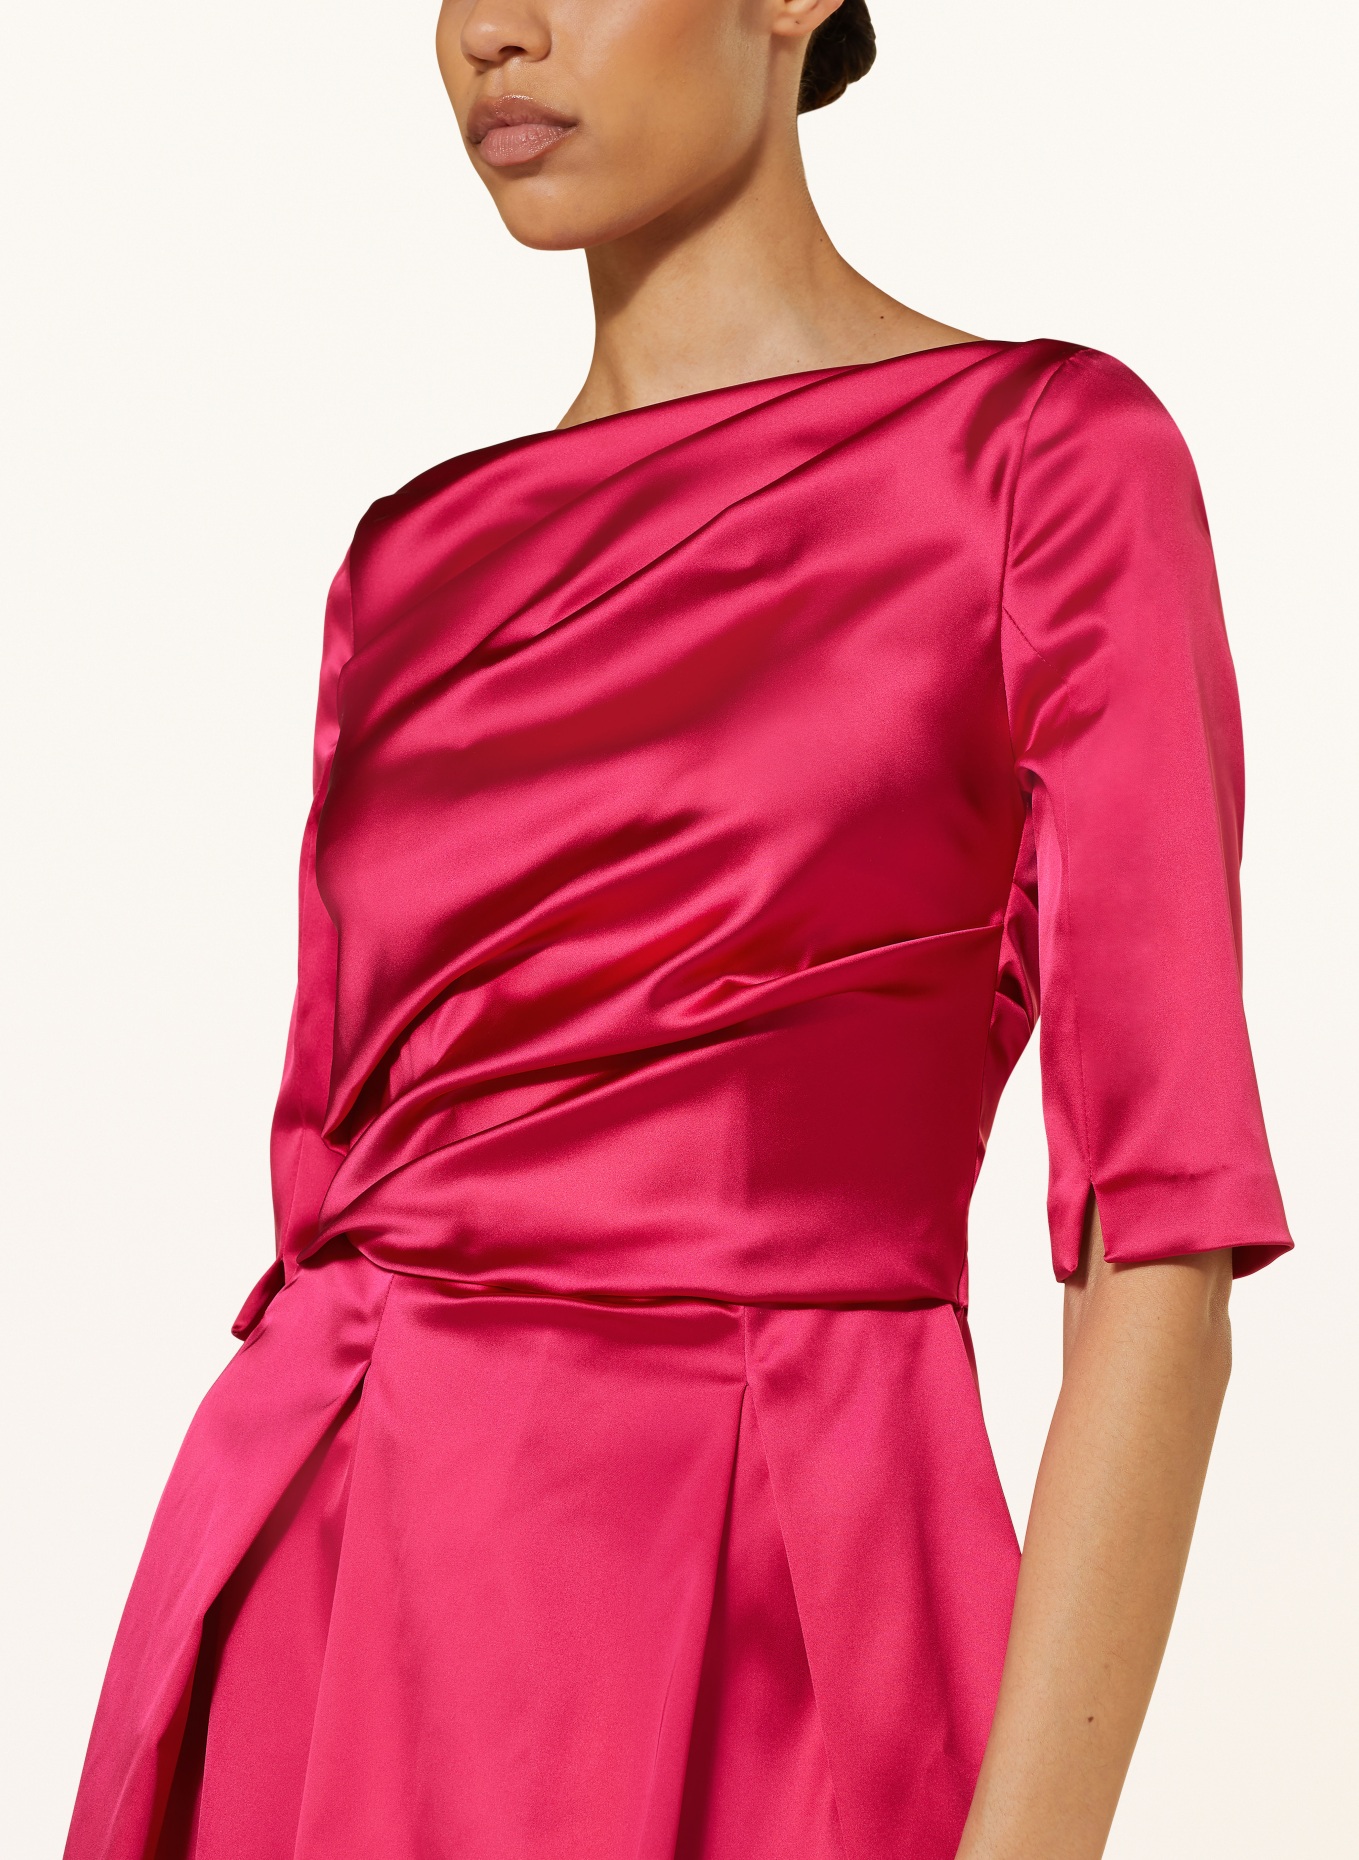 TALBOT RUNHOF Cocktail dress with 3/4 sleeves, Color: PINK (Image 4)